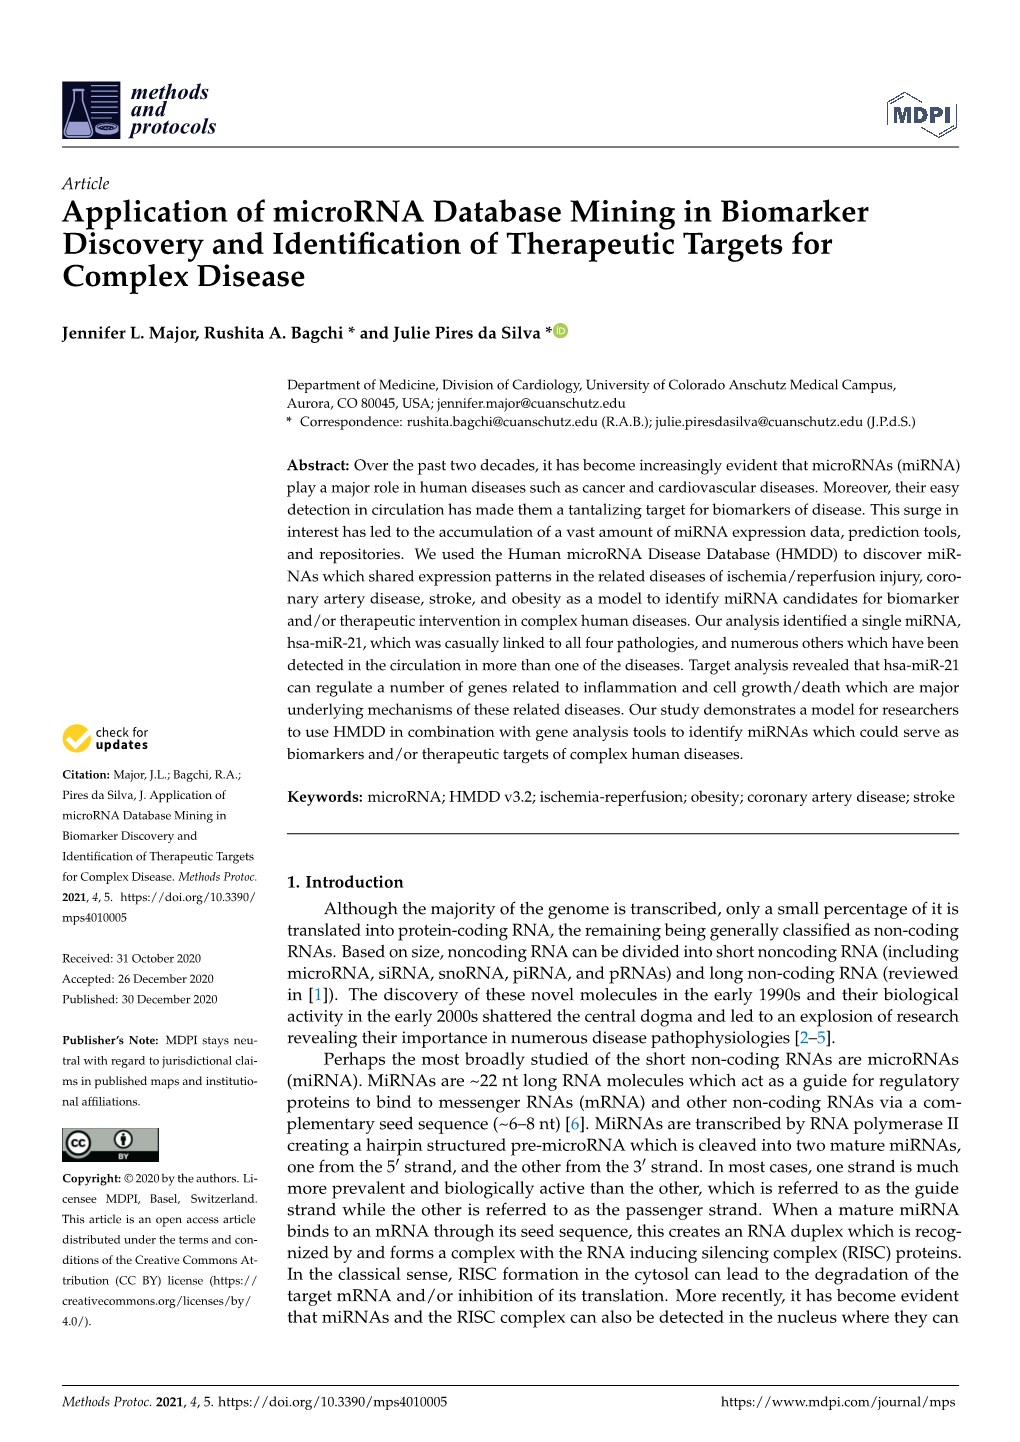 Application of Microrna Database Mining in Biomarker Discovery and Identiﬁcation of Therapeutic Targets for Complex Disease